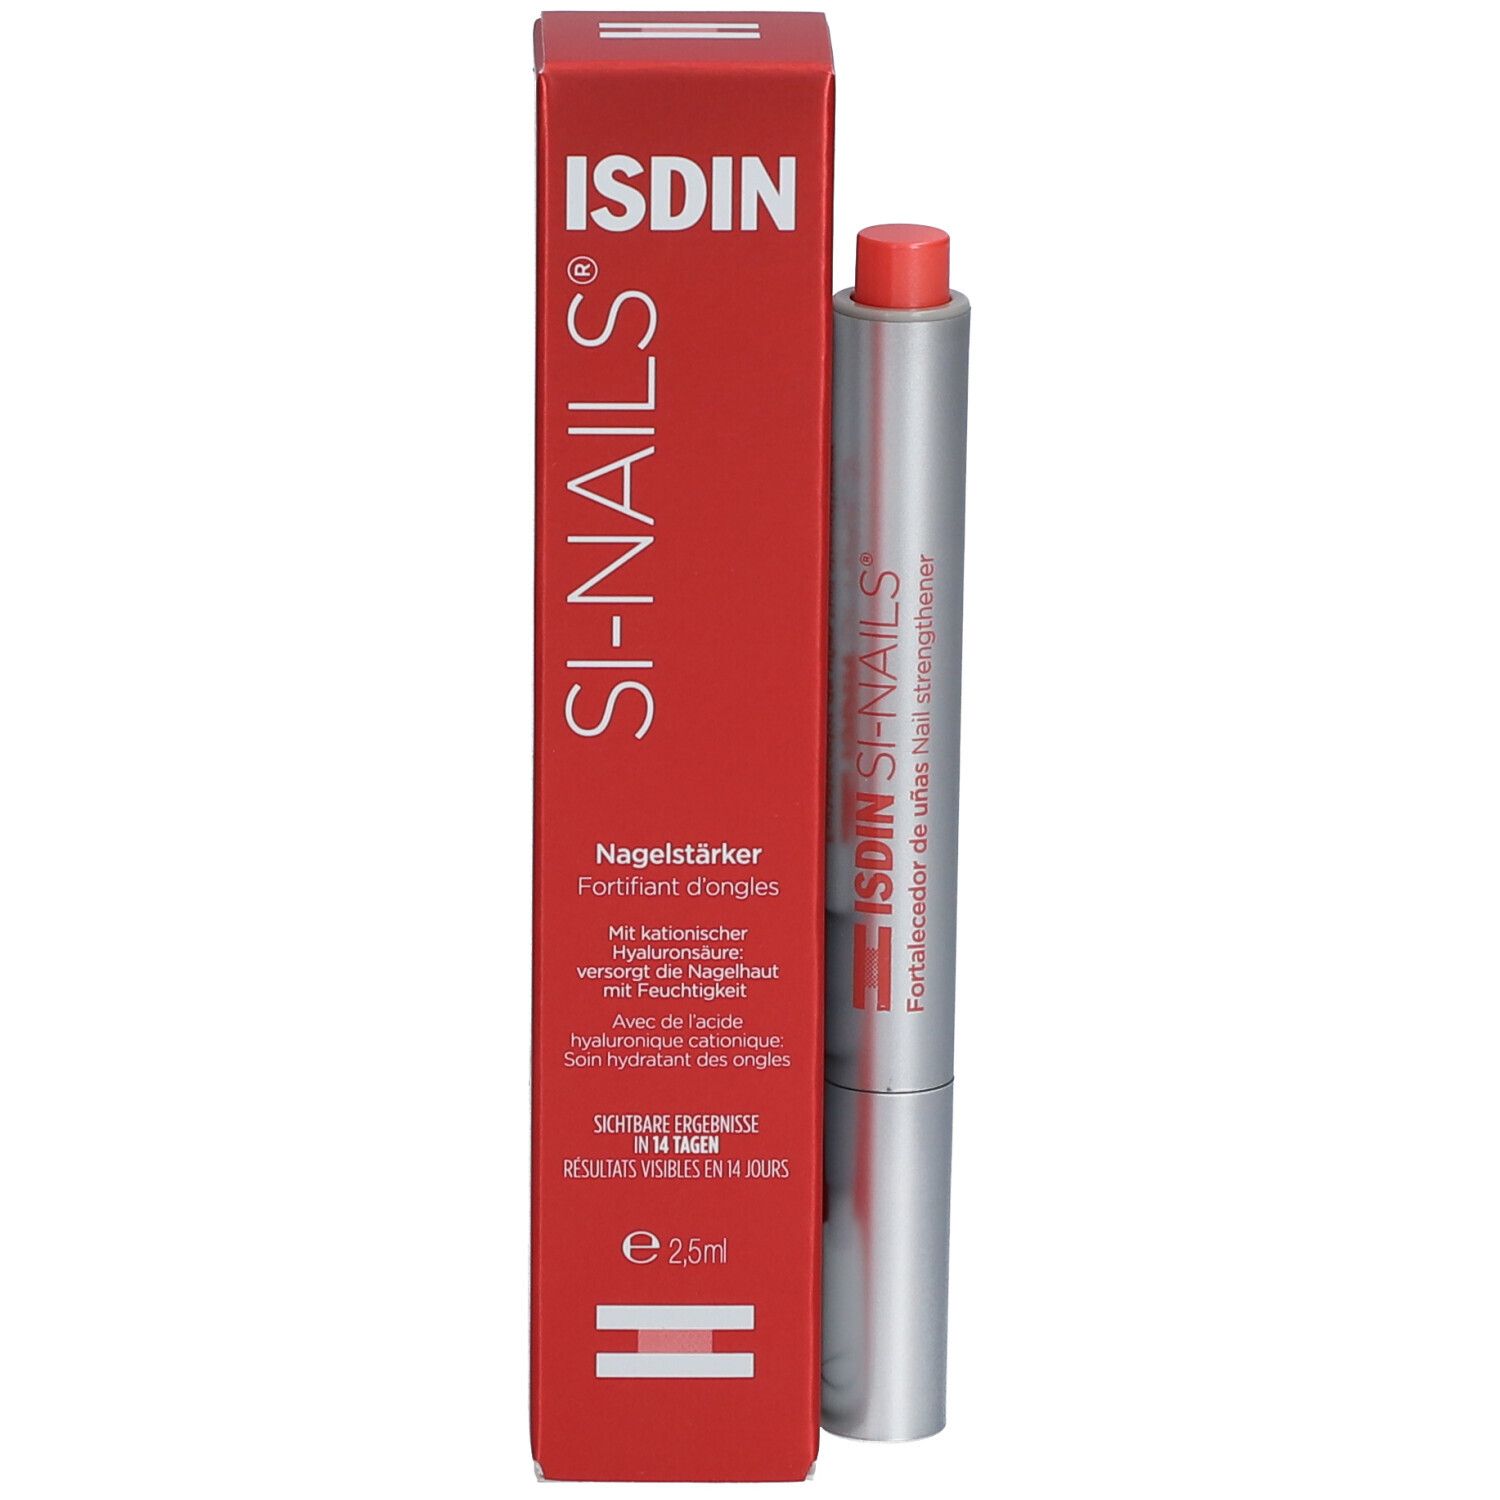 Isdin Si-Nails Nail Strengthener review - twindly beauty blog